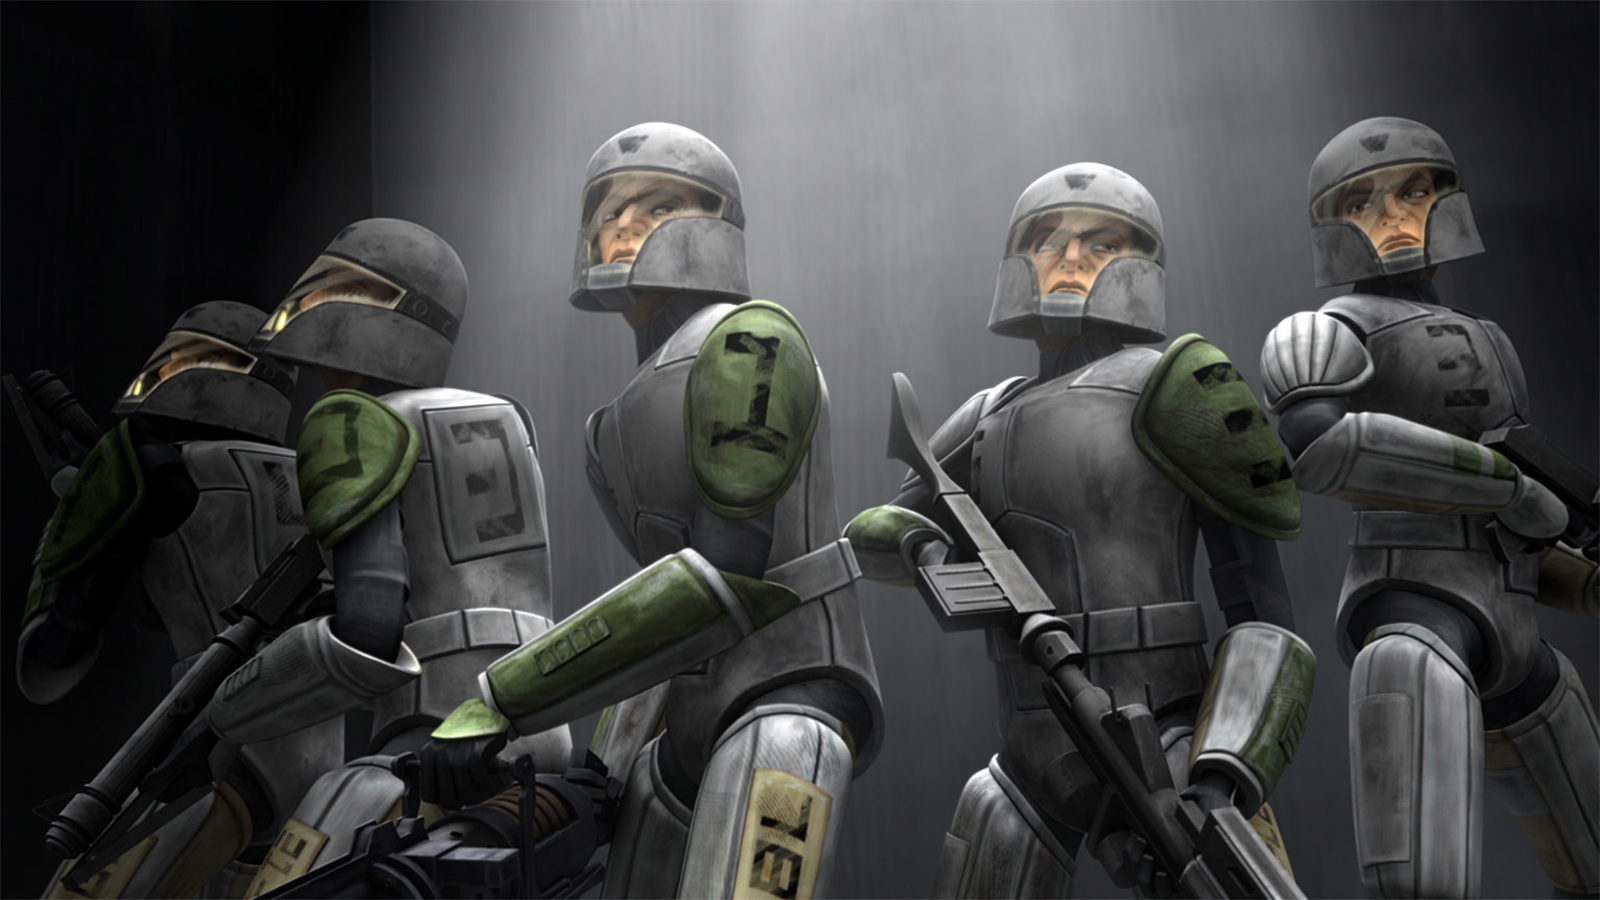 A bunch of clone cadets.